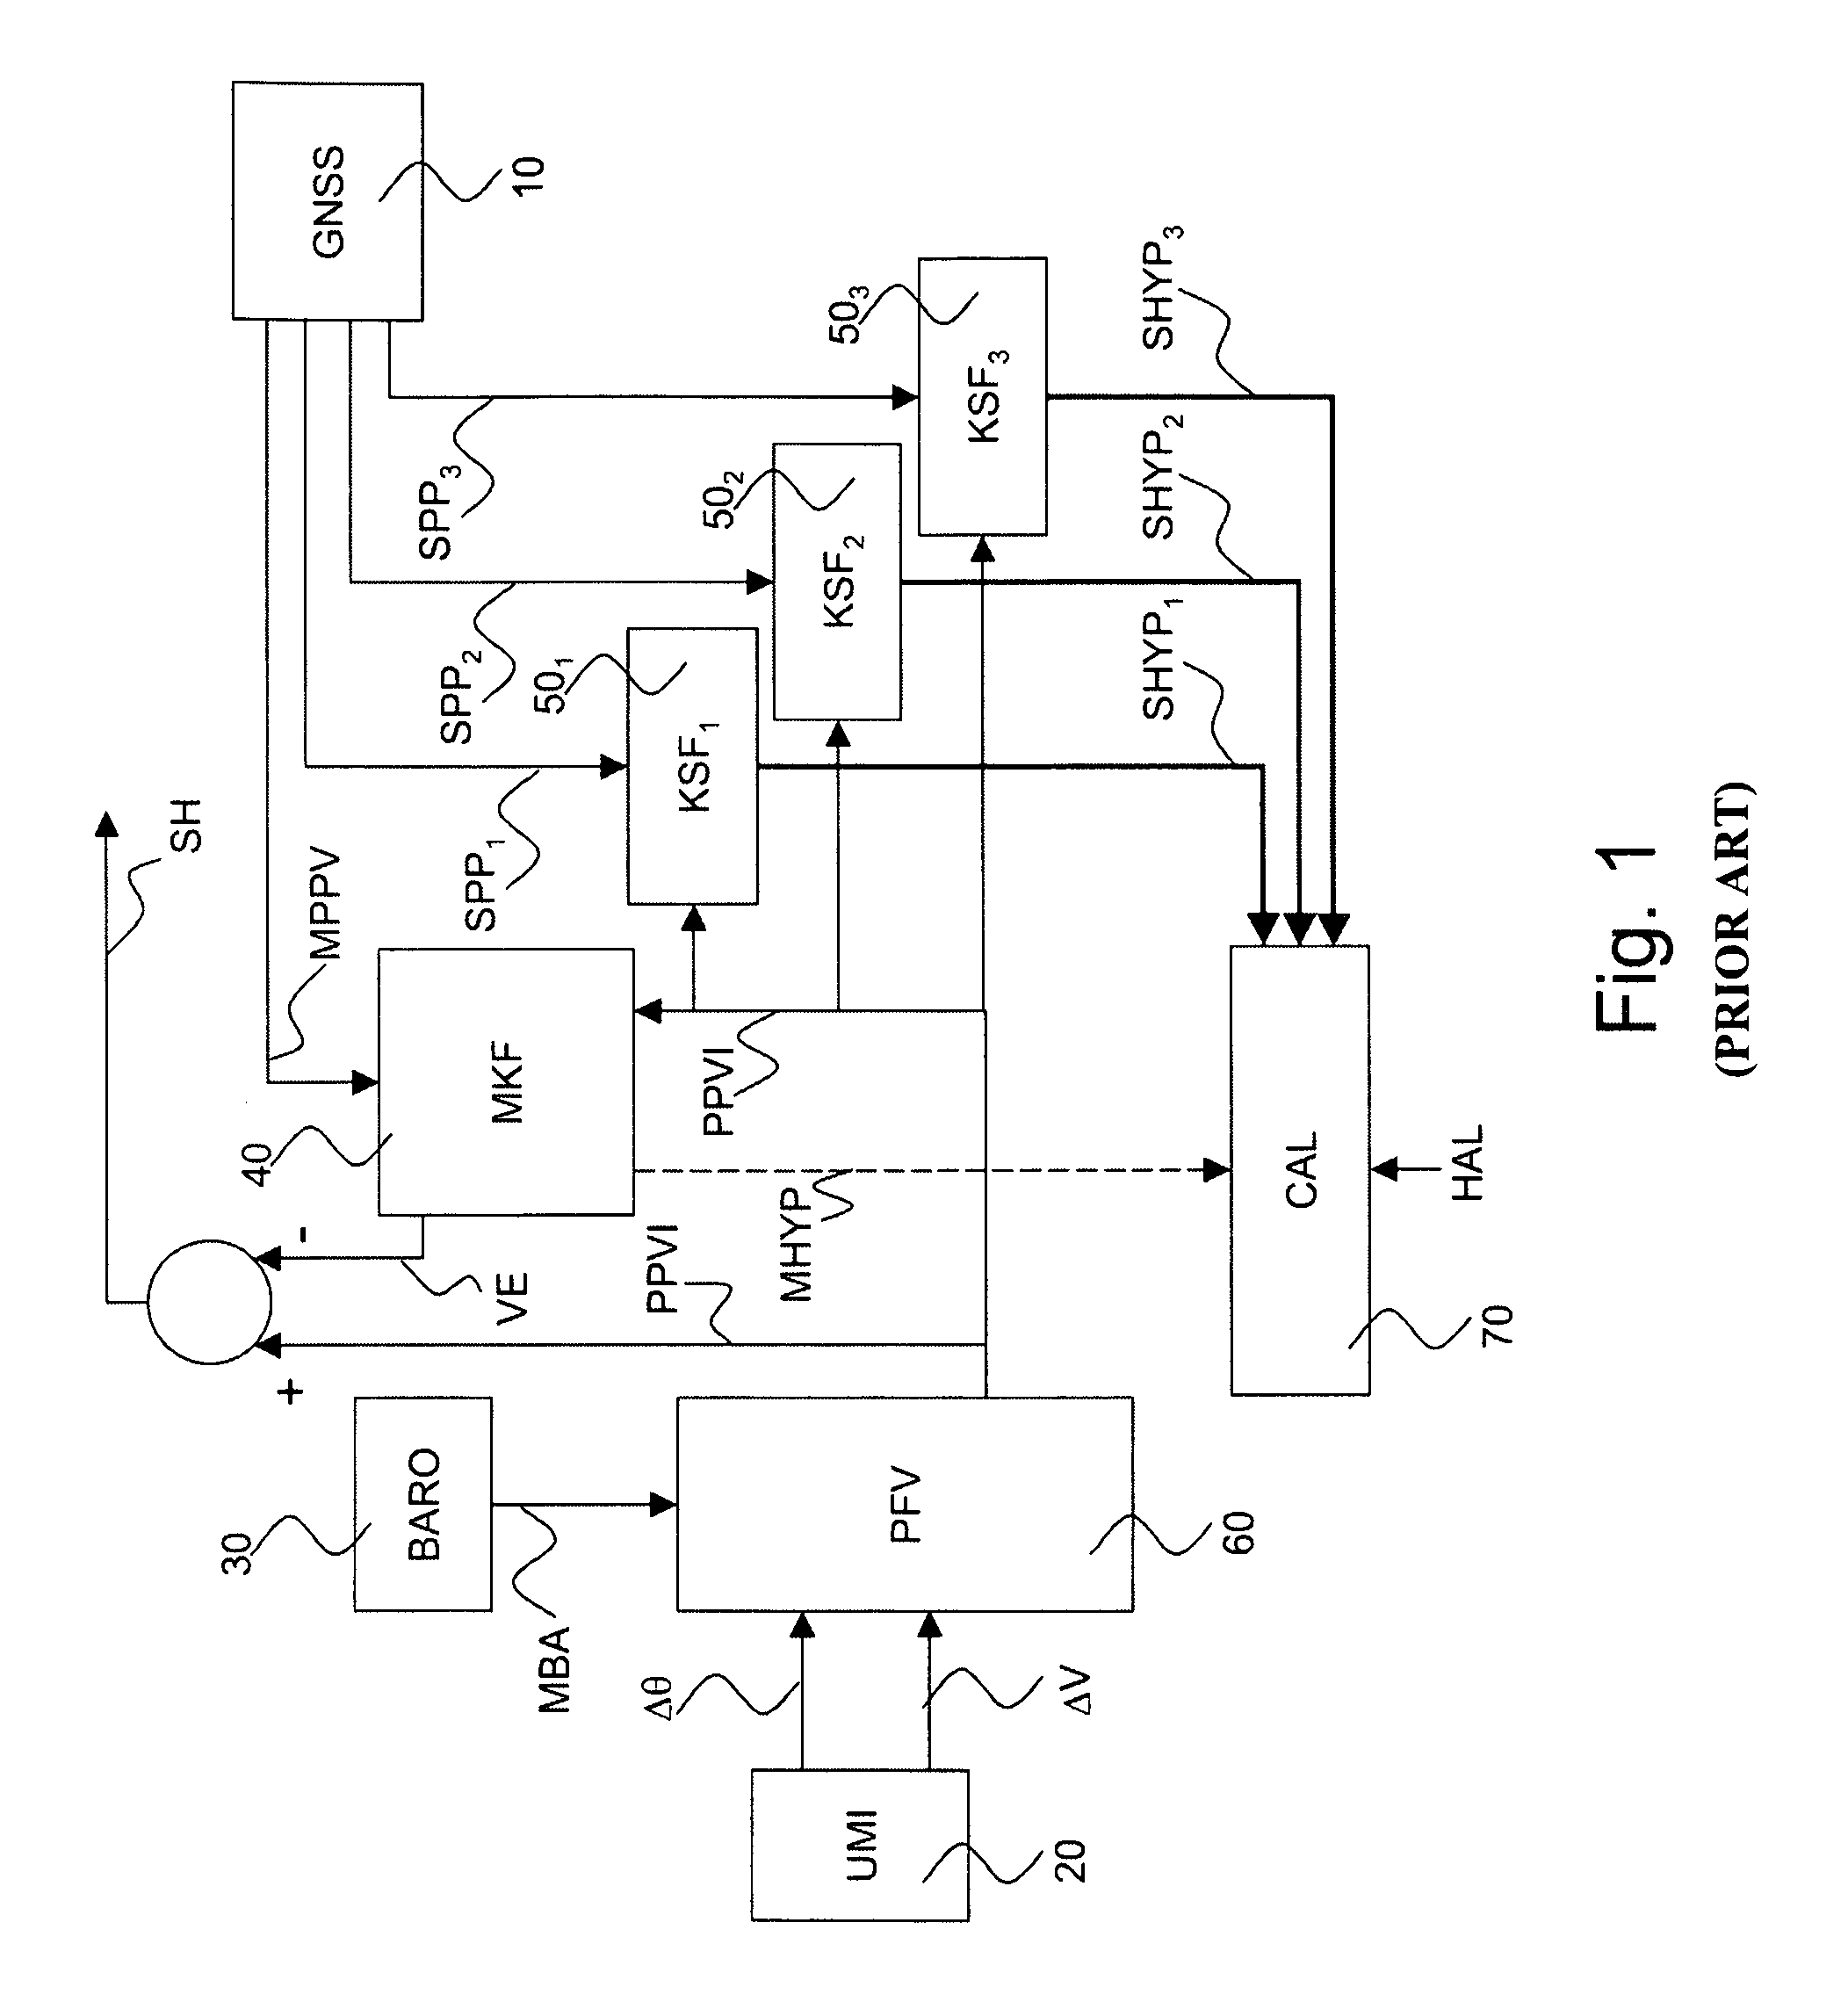 Hybrid INS/GNSS system with integrity monitoring and method for integrity monitoring